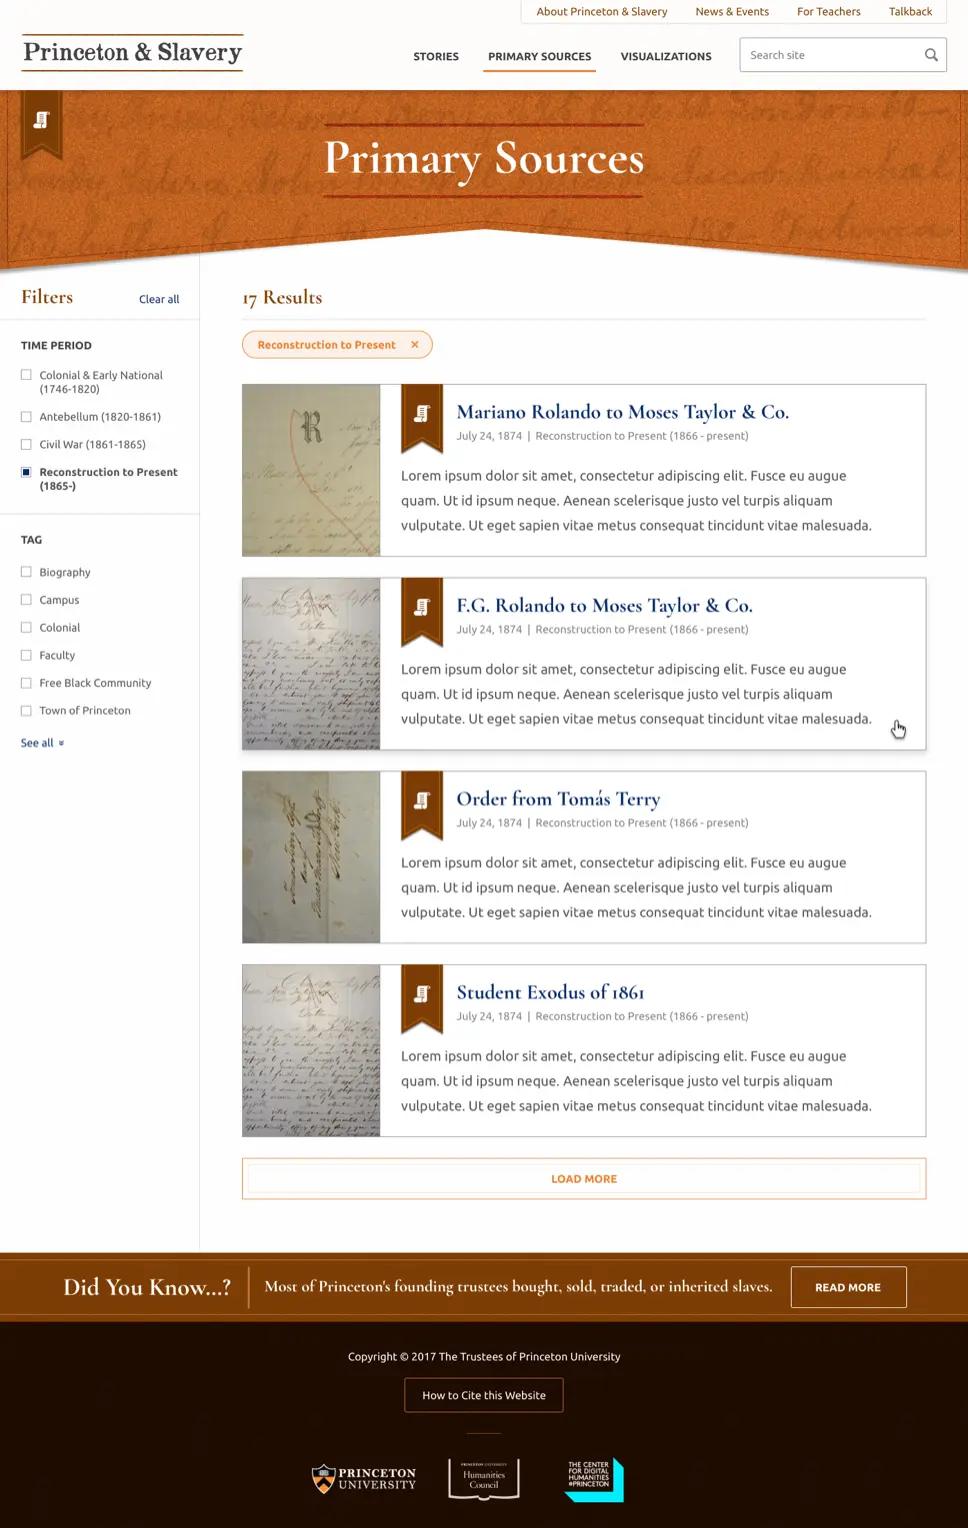 A screenshot of Princeton & Slavery's "Primary Sources" page.